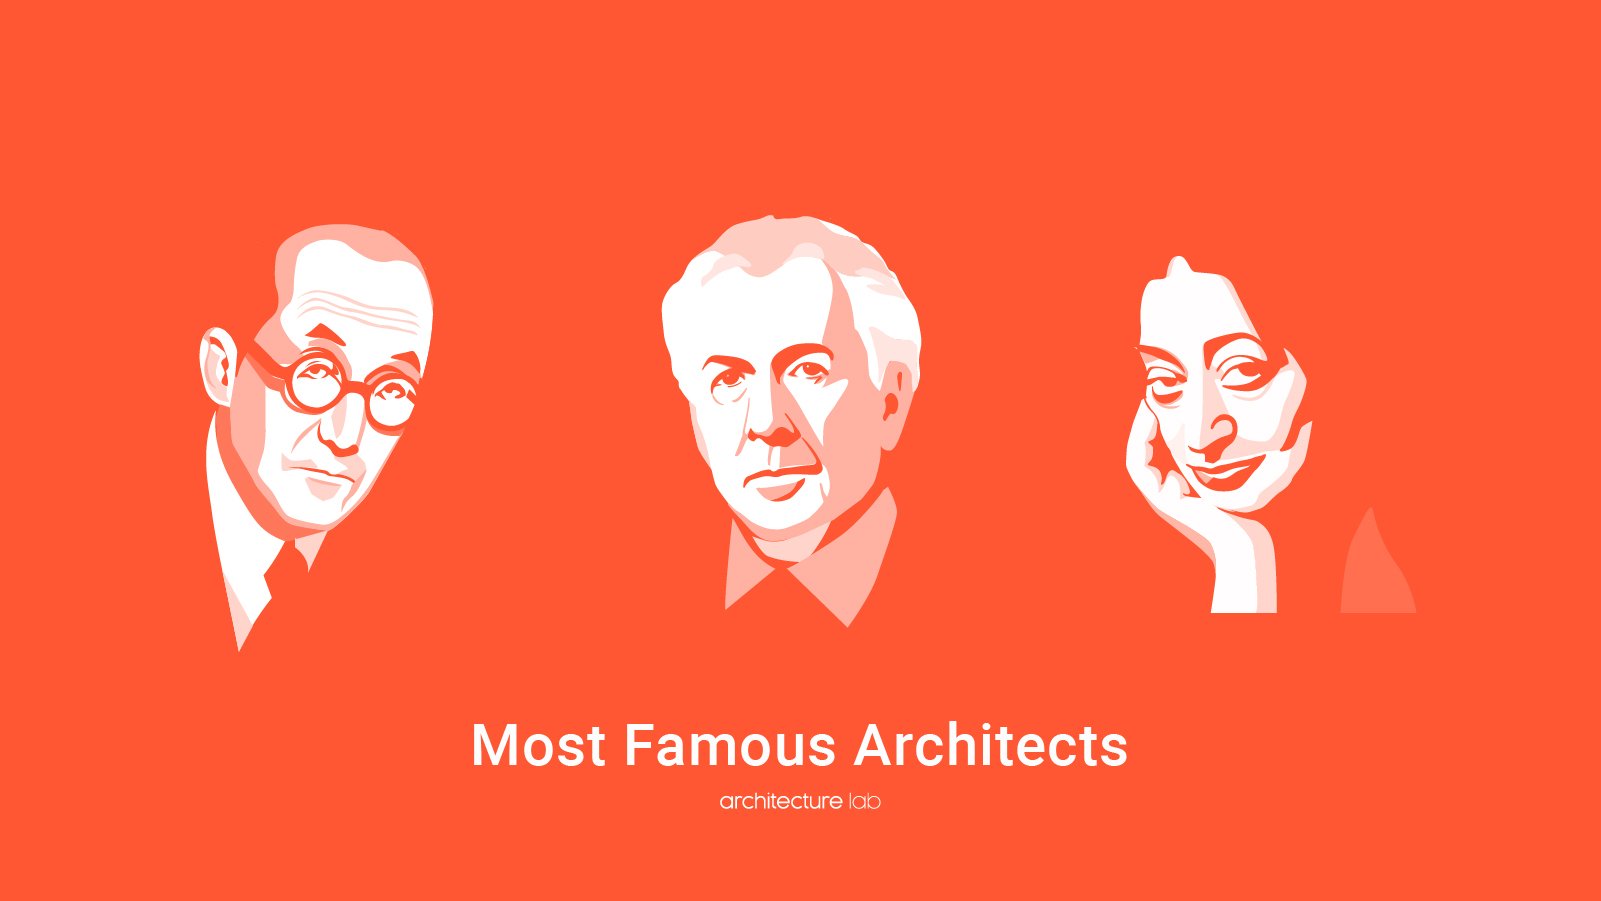 Most famous architects